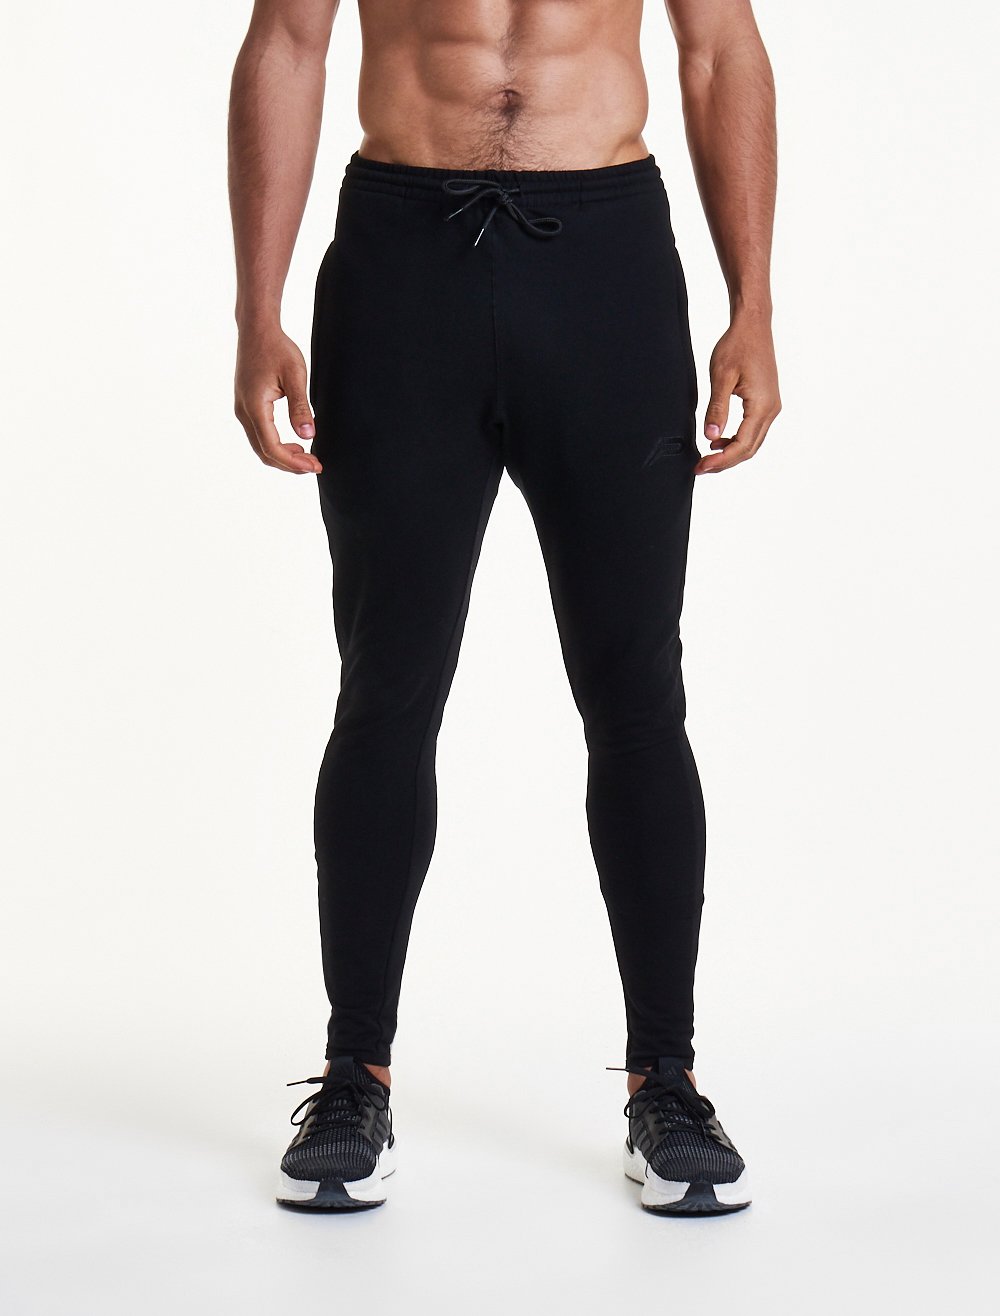 Pro-Fit Tapered Bottoms / Triple Black Pursue Fitness 6